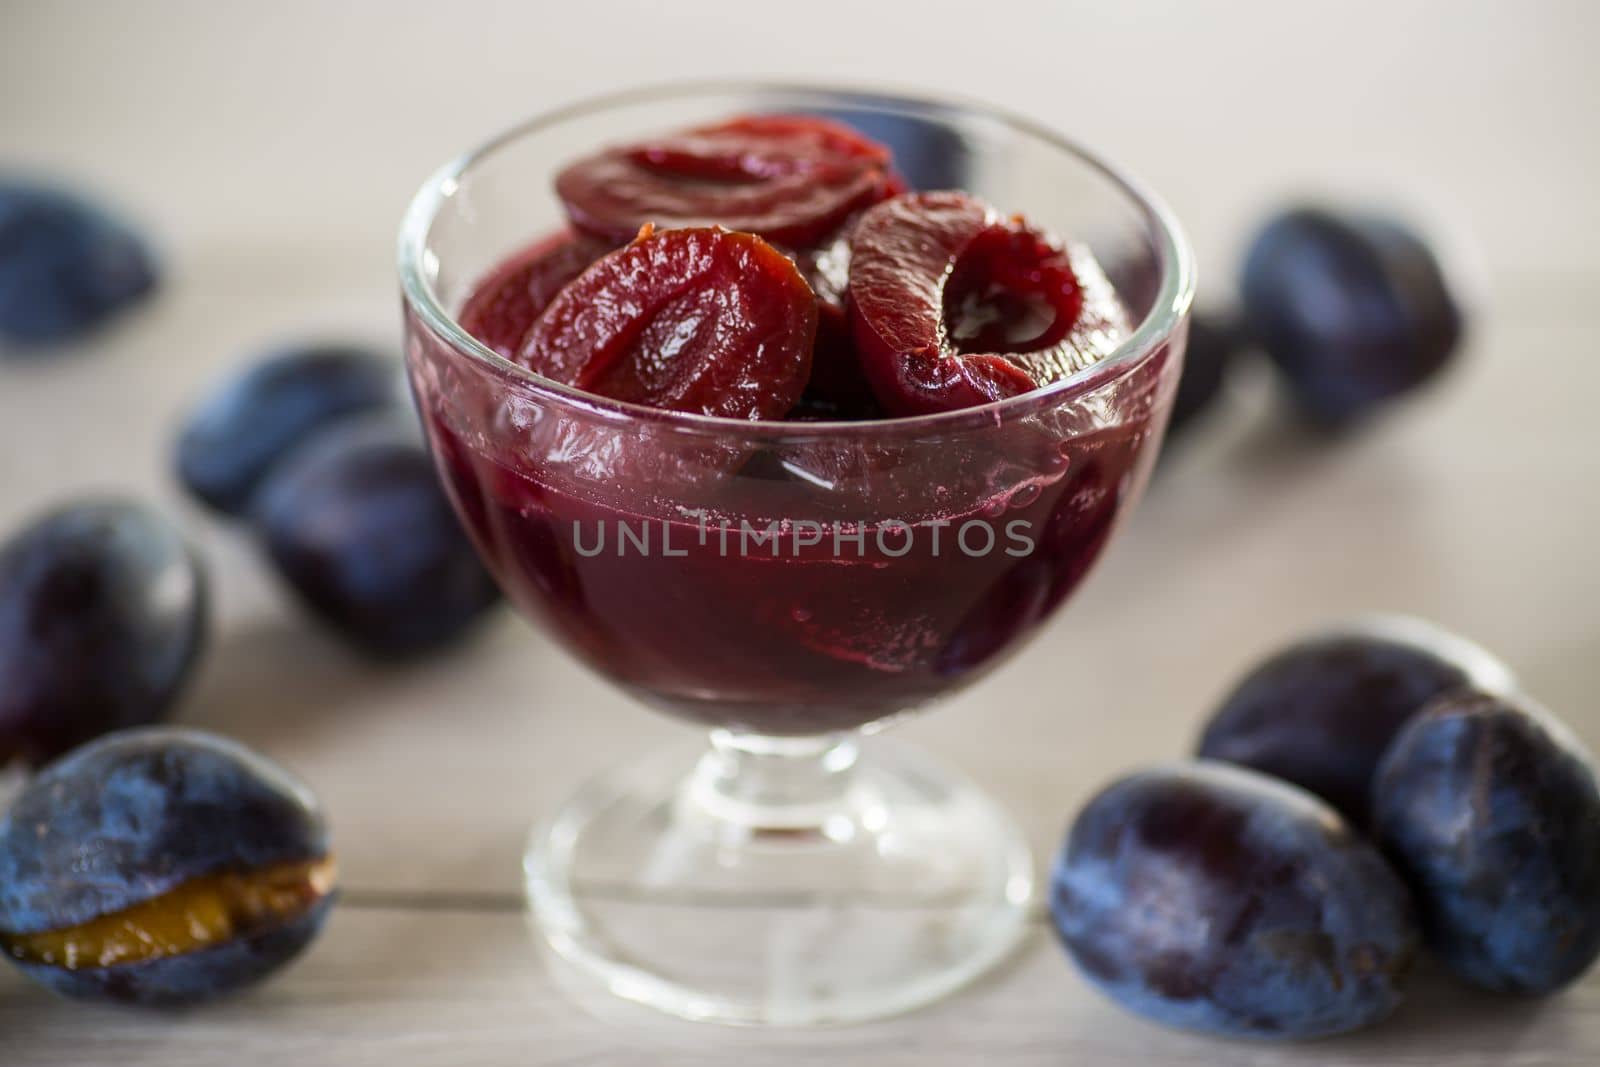 Sweet plums in syrup, in a glass bowl on a wooden table.